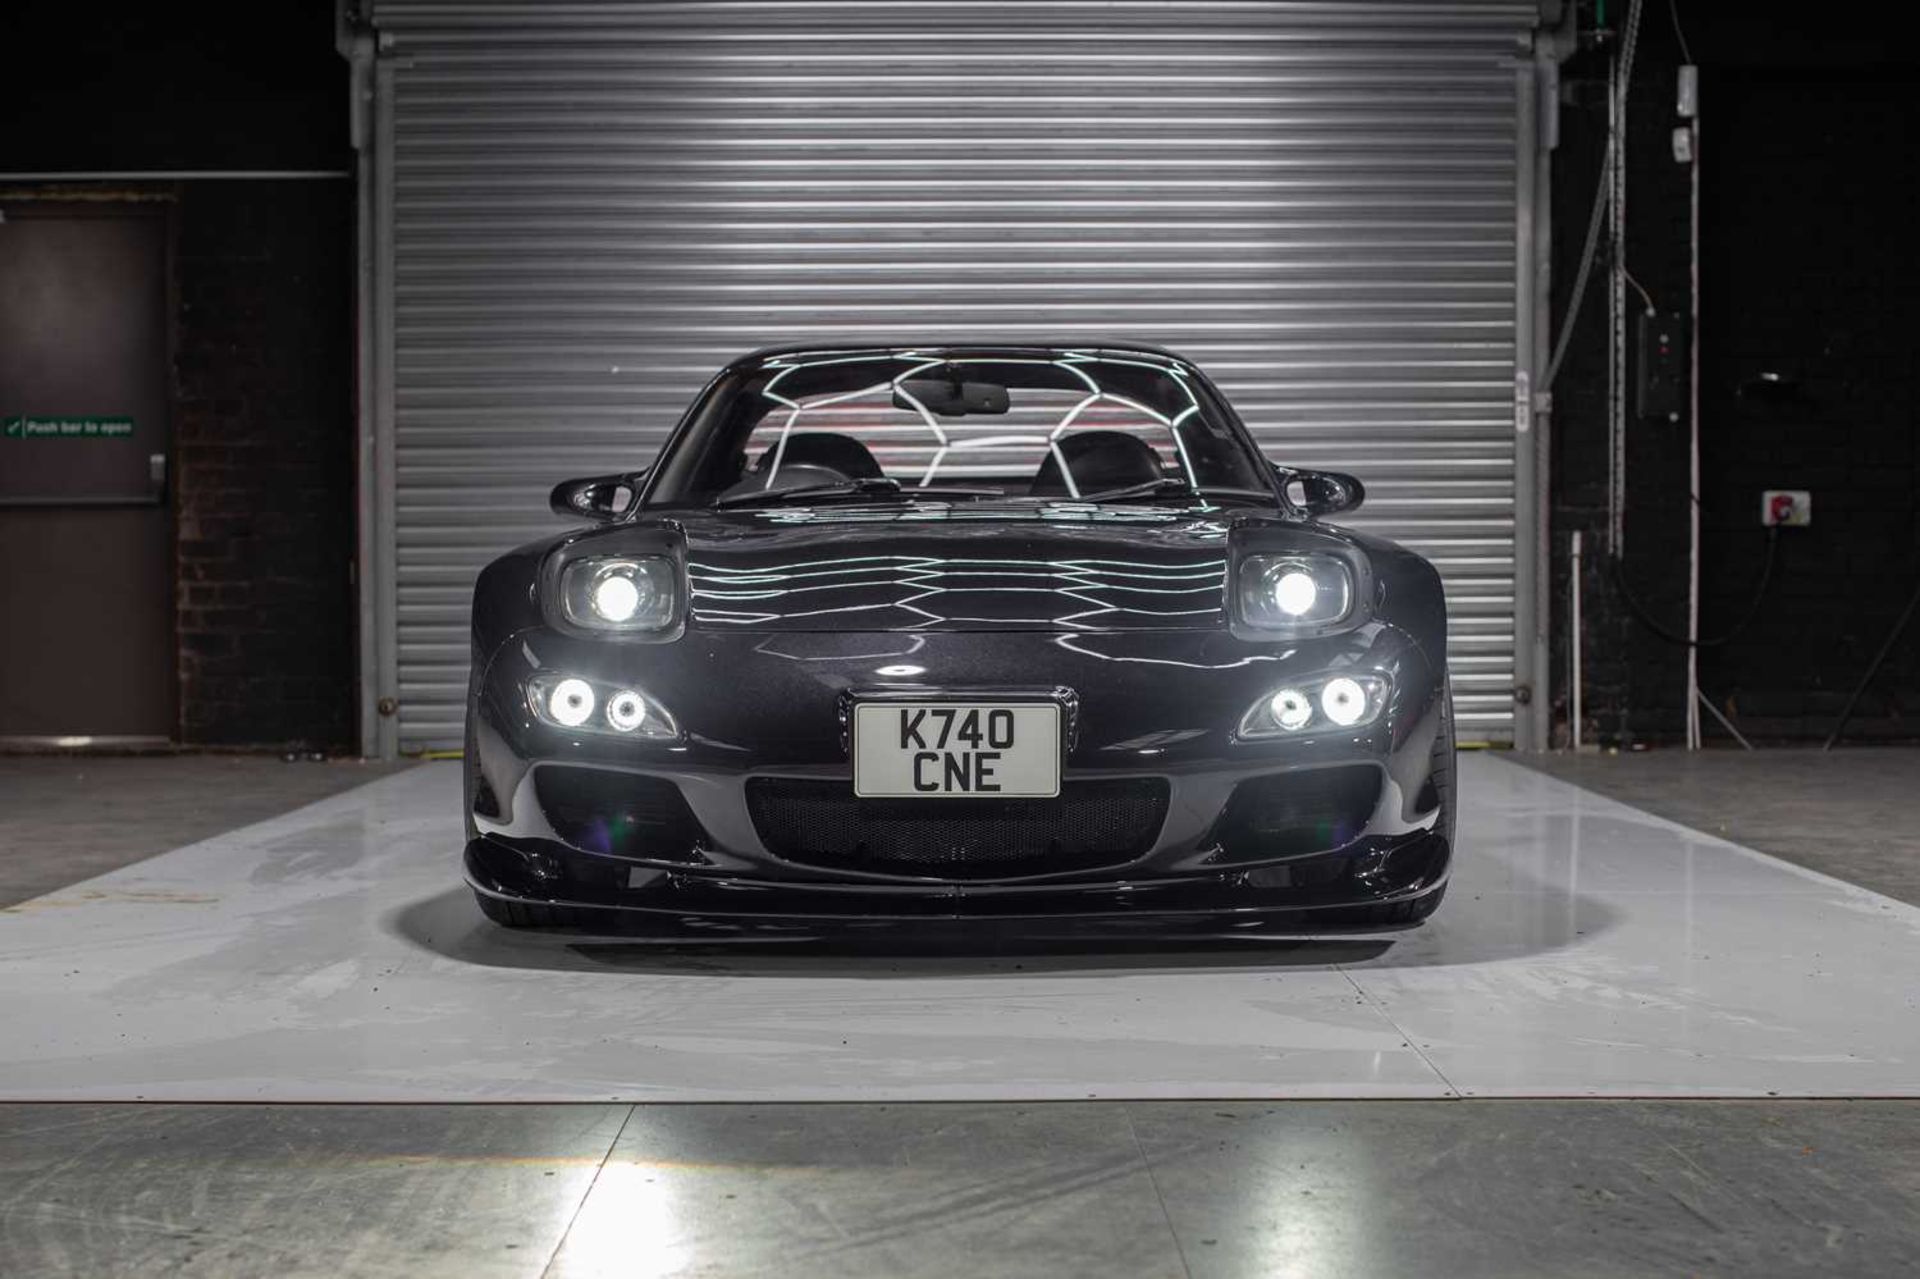 1993 Mazda RX7 FD Efini UK registered since 2003 and the subject of a major restoration and upgrade  - Image 7 of 108